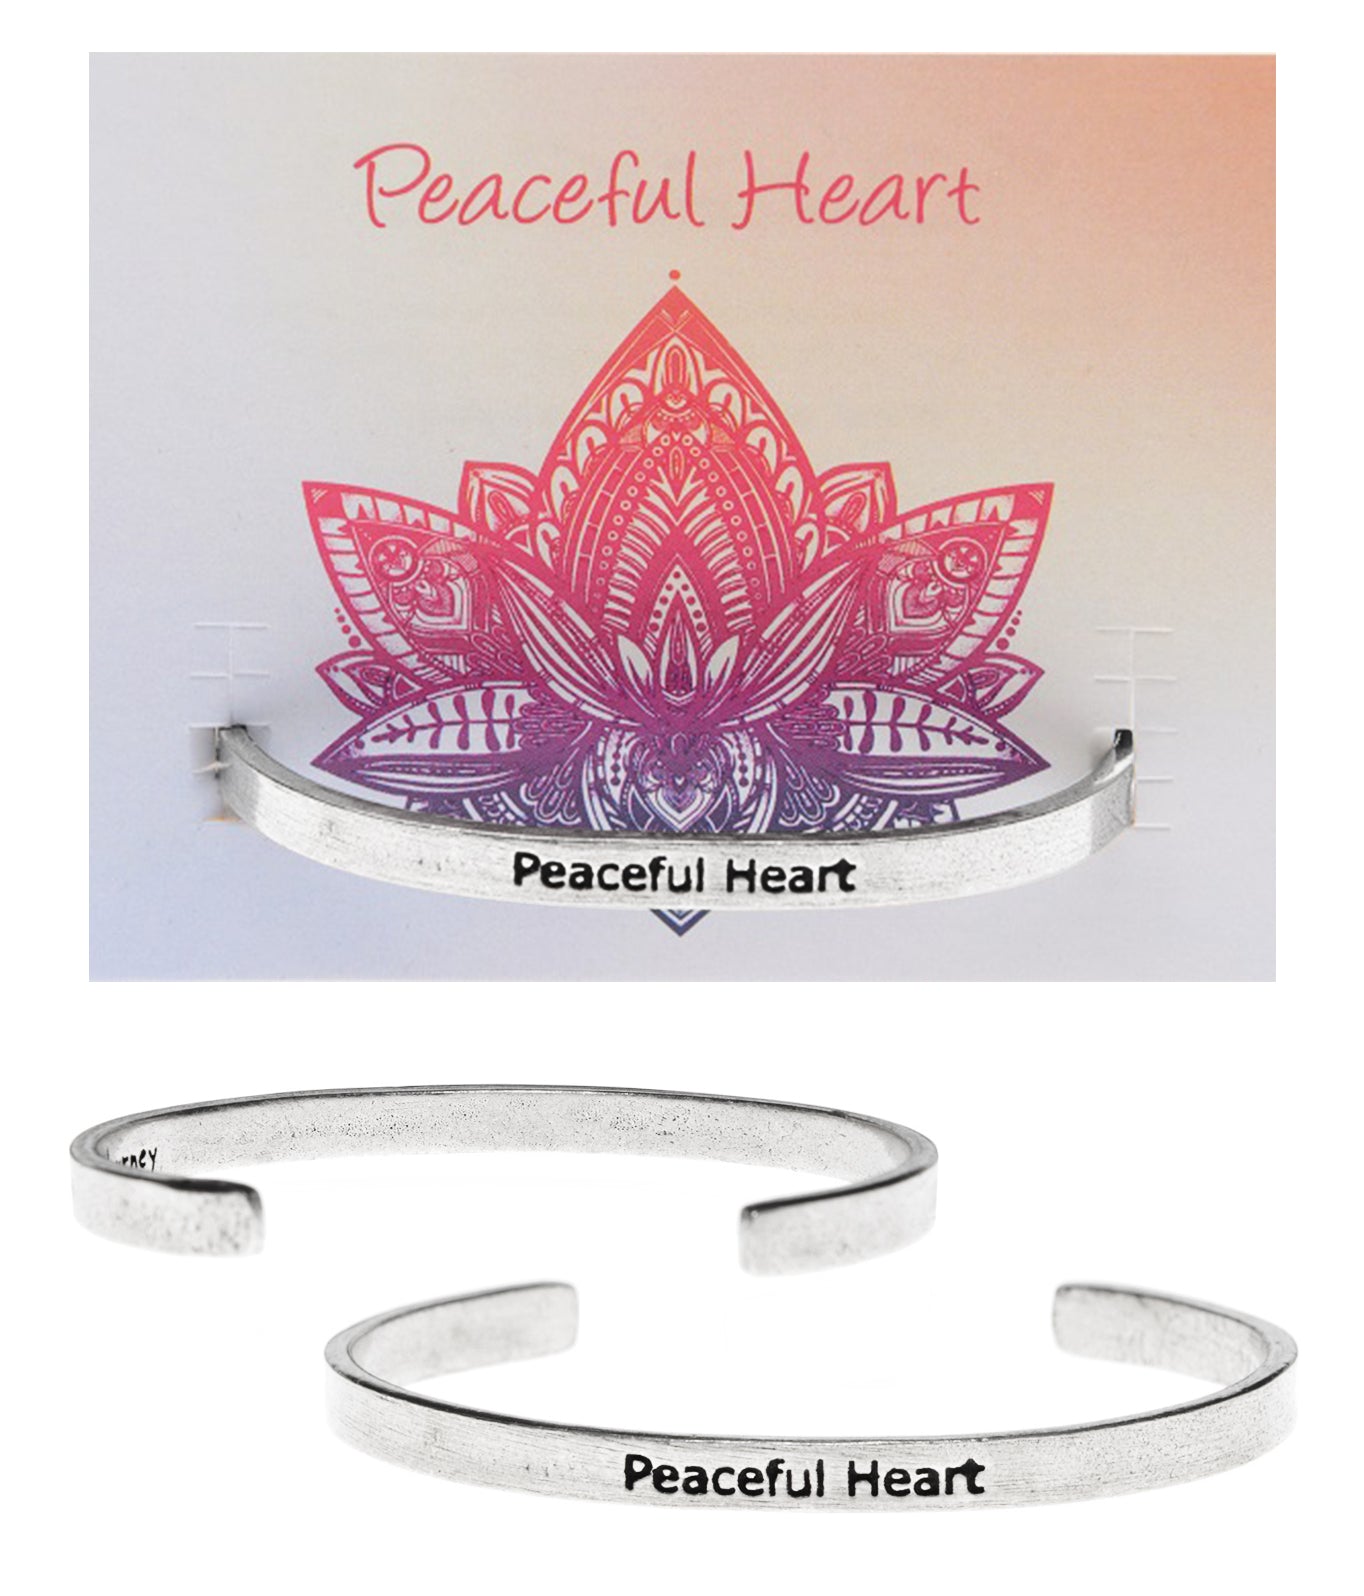 Peaceful Heart Quotable Cuff Bracelet | Inspiring Jewelry and Gifts